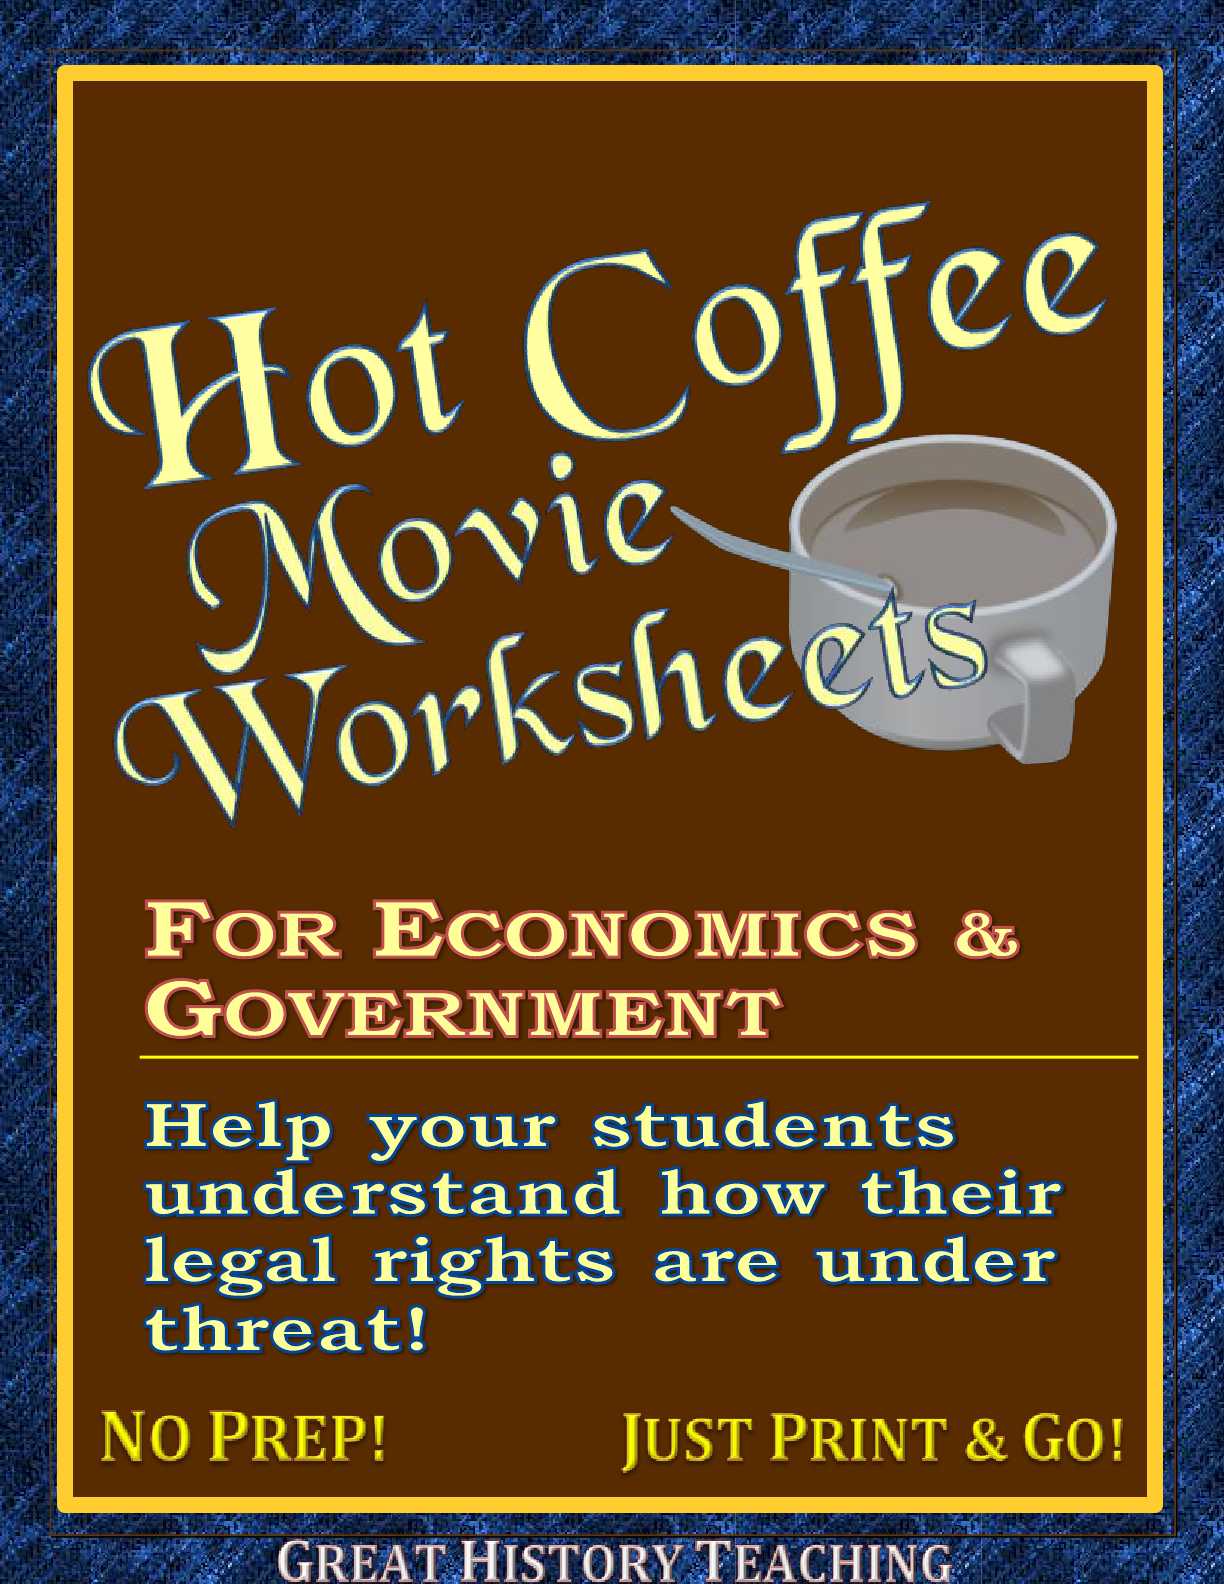 Citizenship In the World Worksheet and Hot Coffee Movie Worksheets and Puzzle Pages